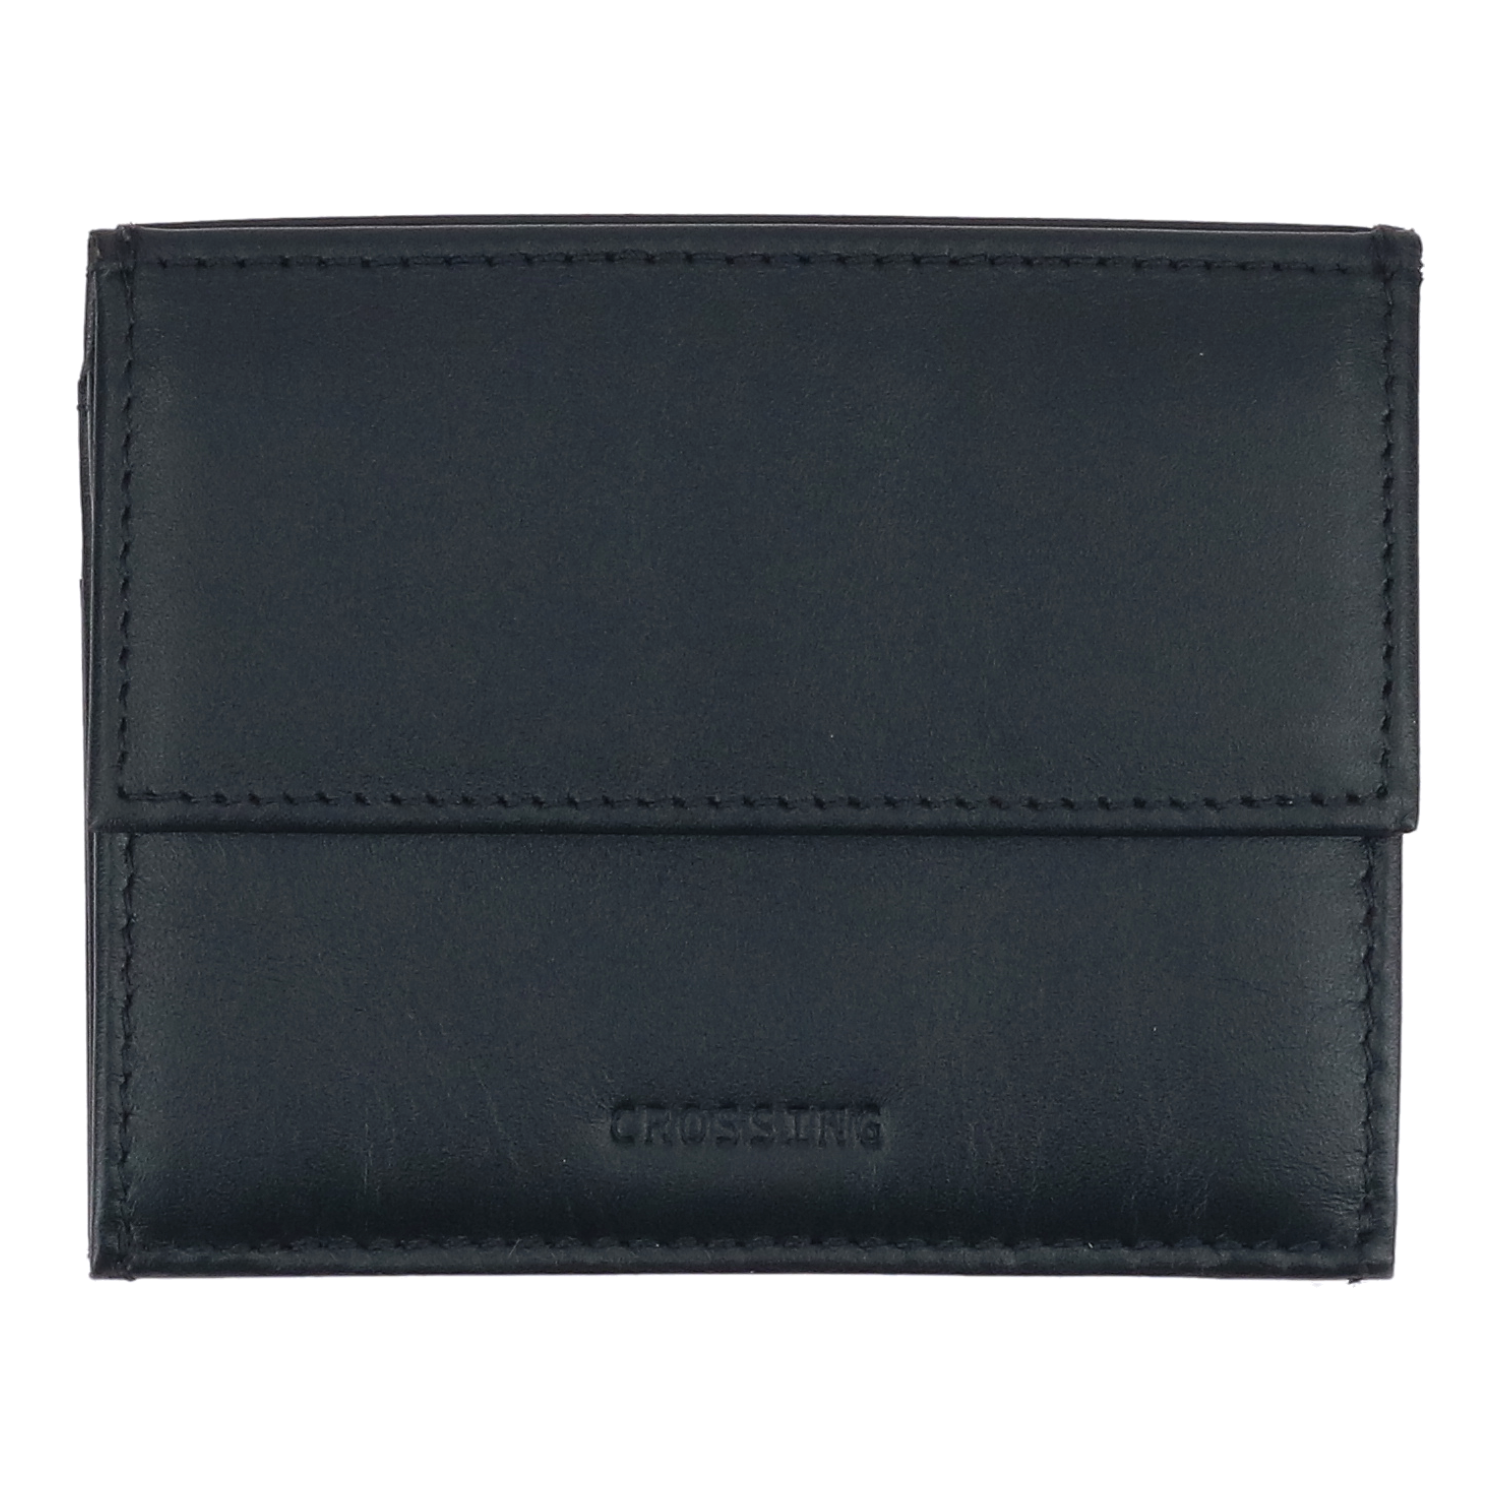 Crossing-Sydney-Coin-Pouch-With-Card-Case-Black_01.png